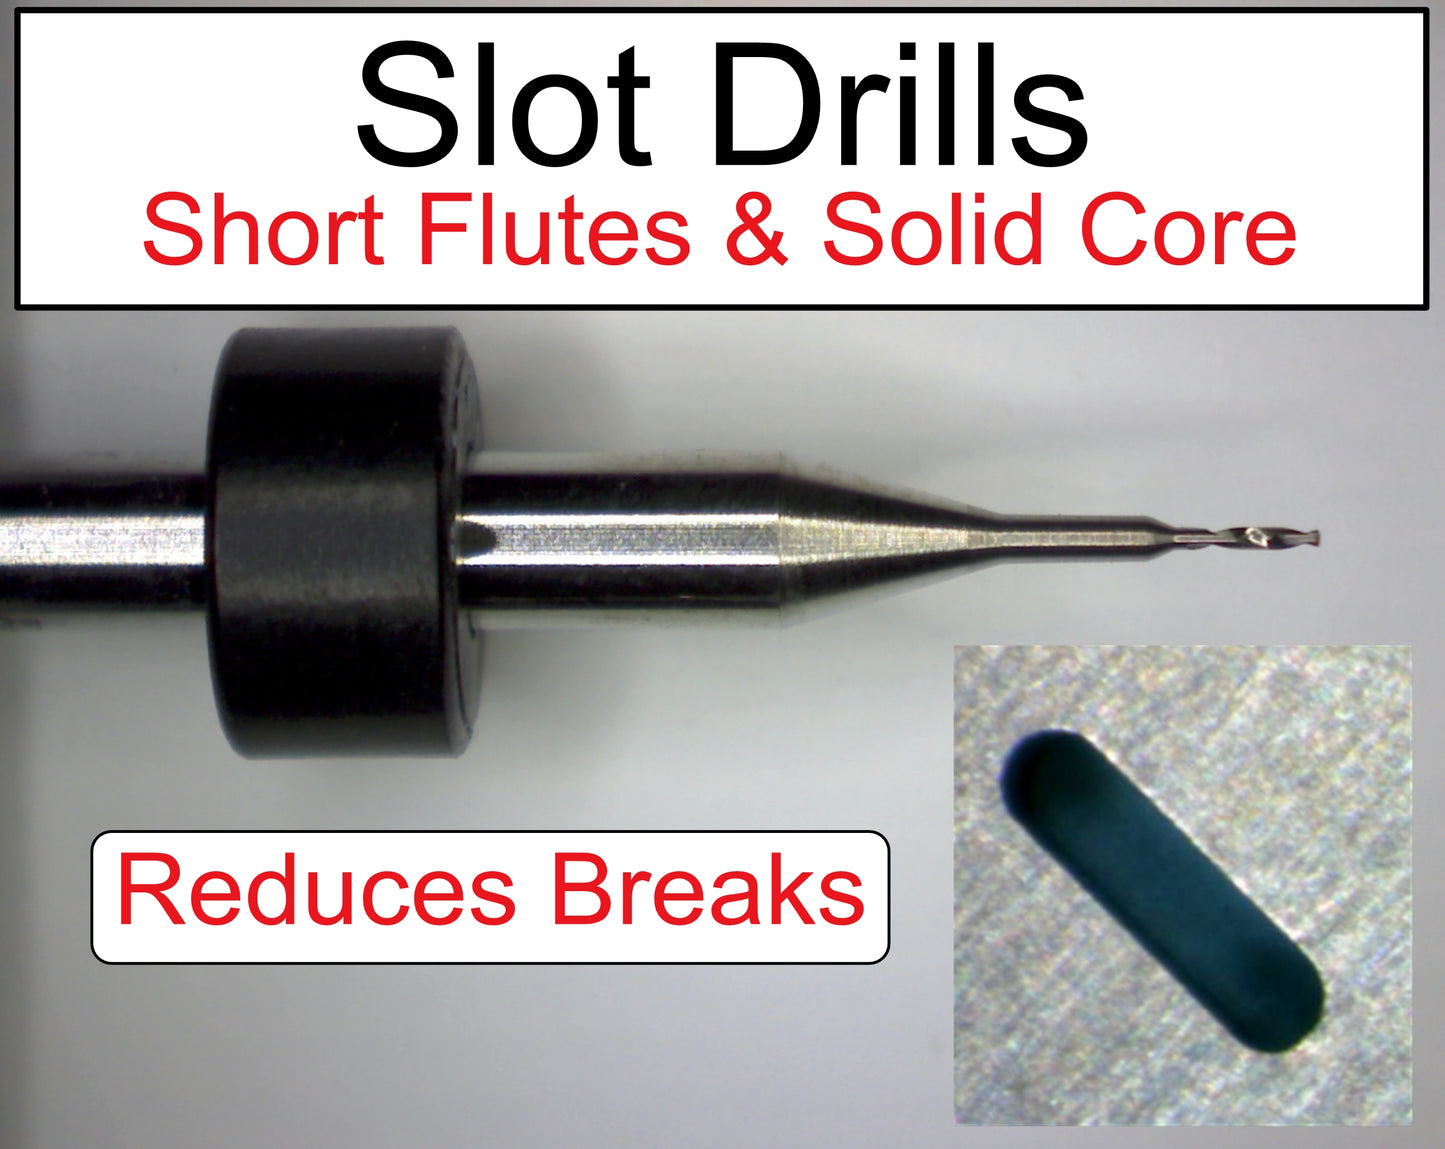 Slot Drills - Shorter Flute Lengths and a Solid Core to Reduce Breaks Great for Pecking Slots - Choose the Size